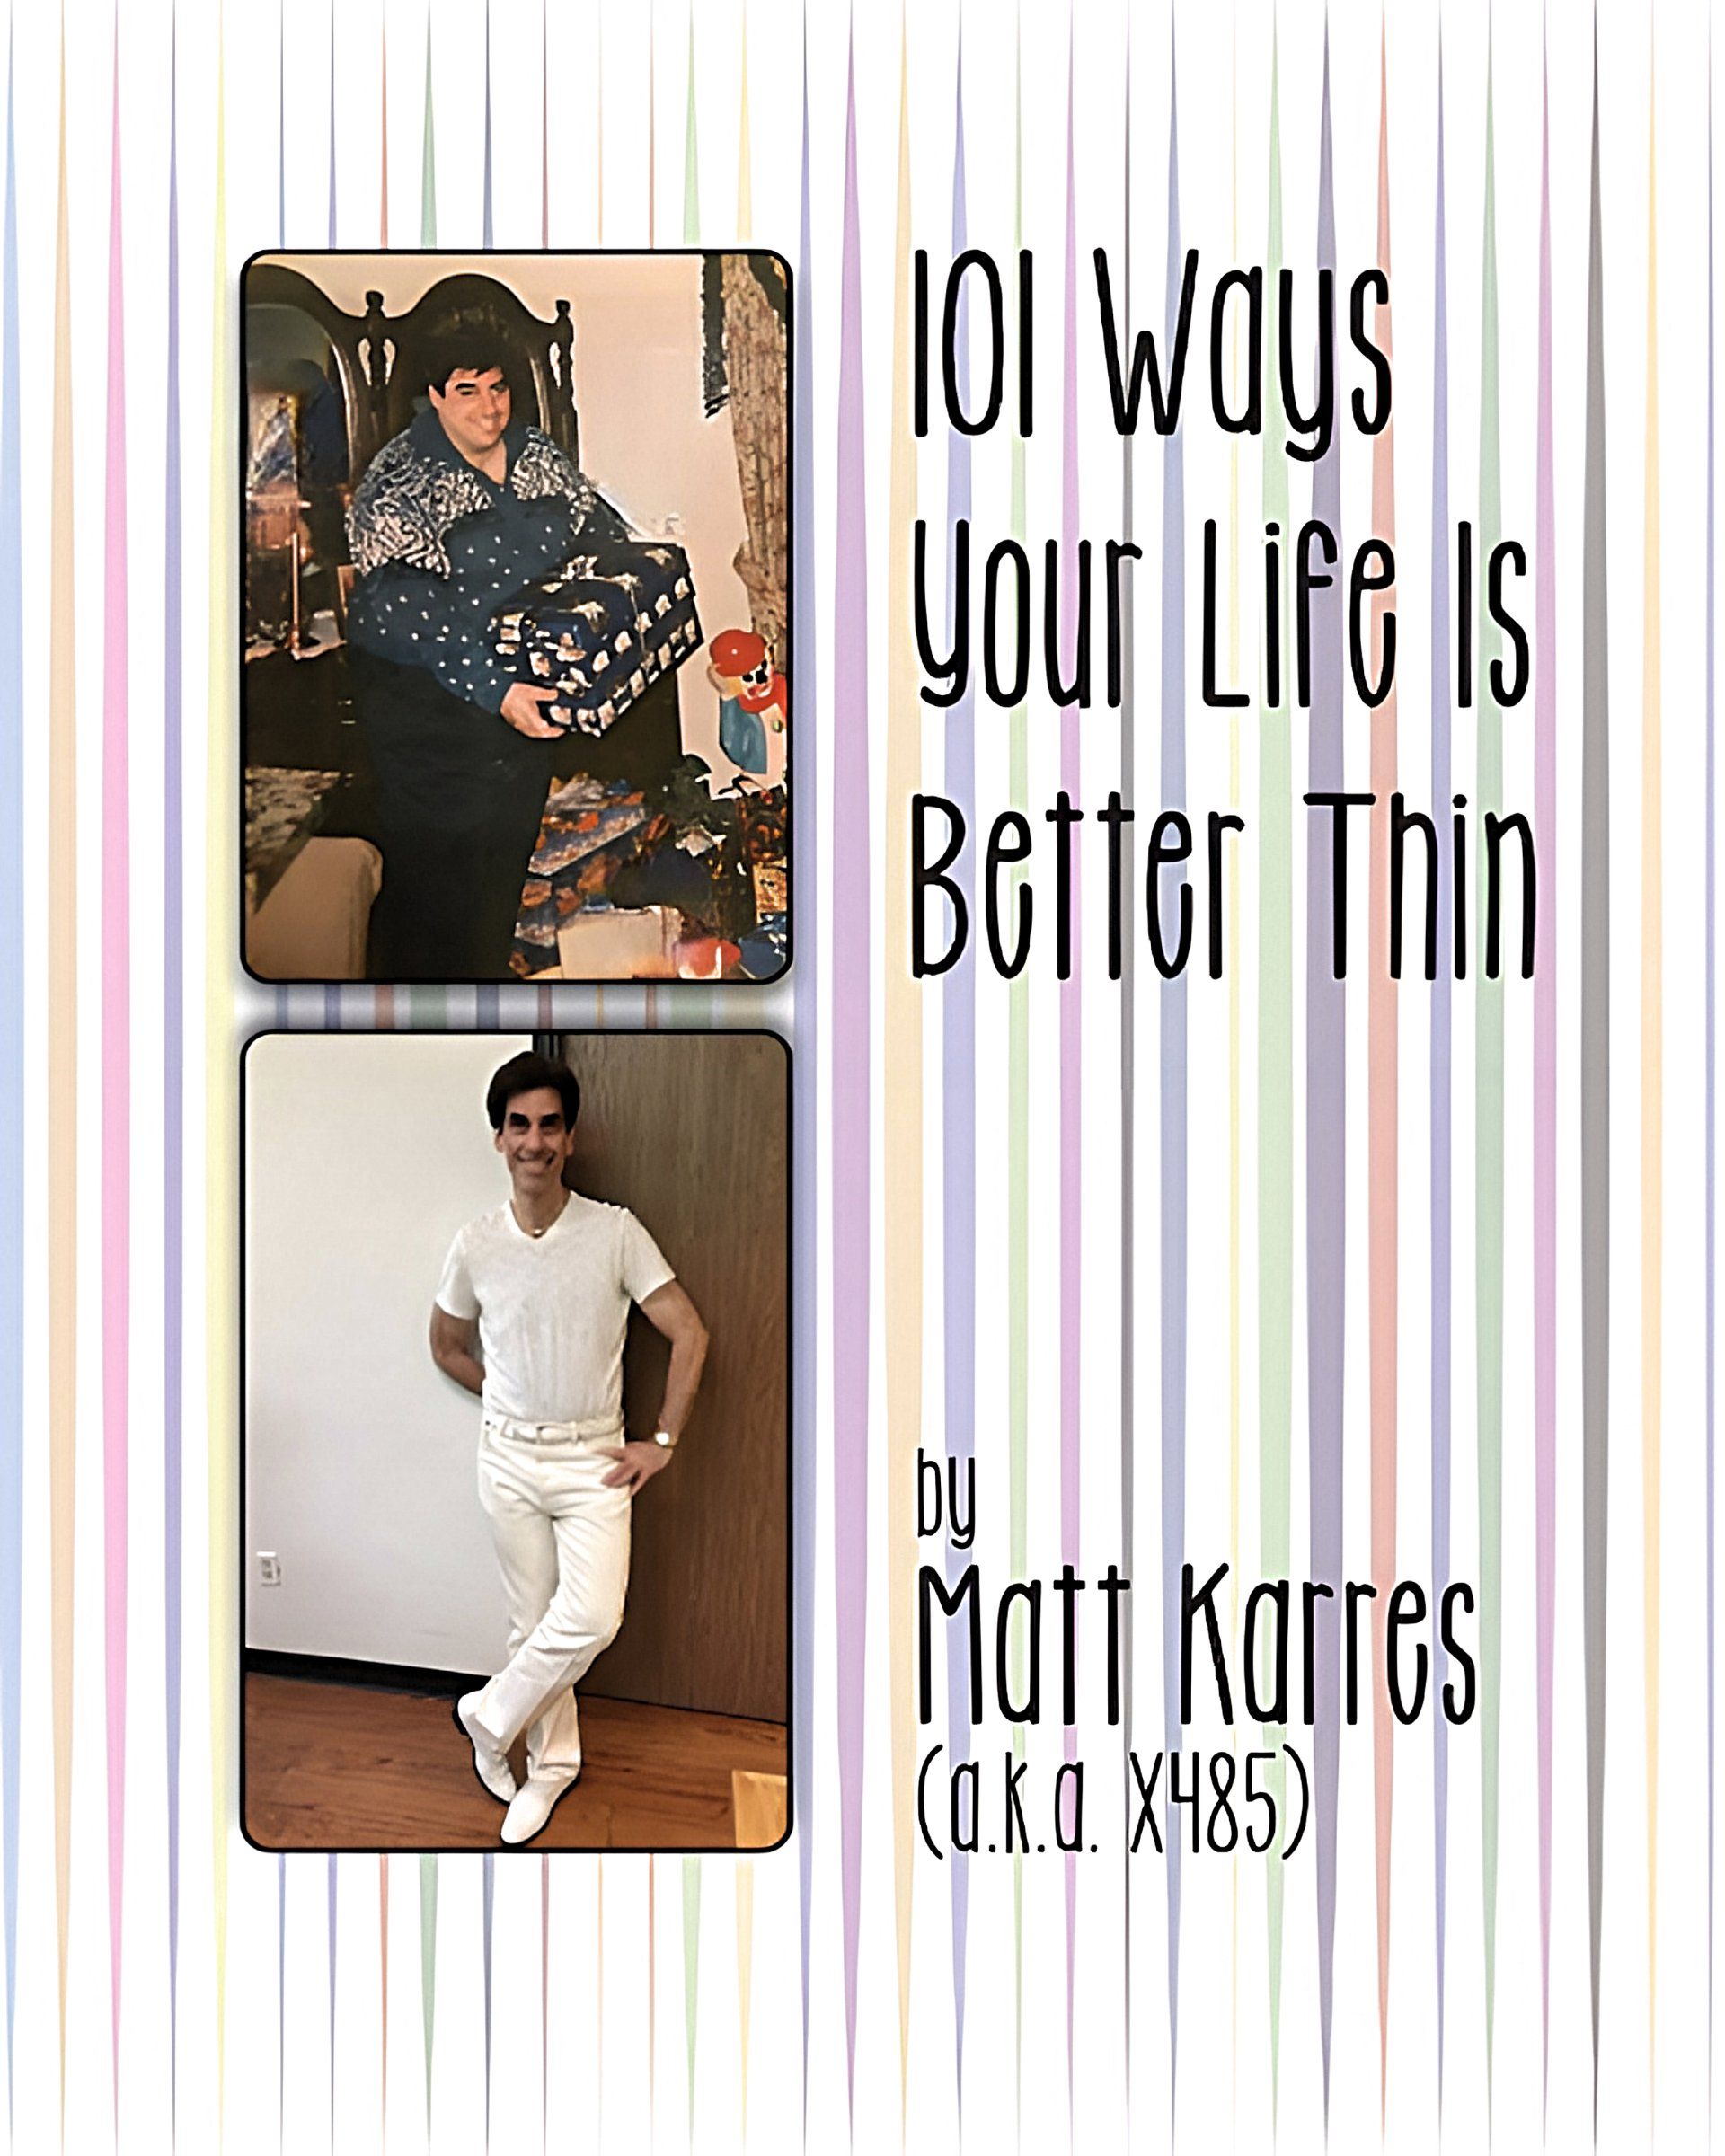 101 ways your life is better thin book cover